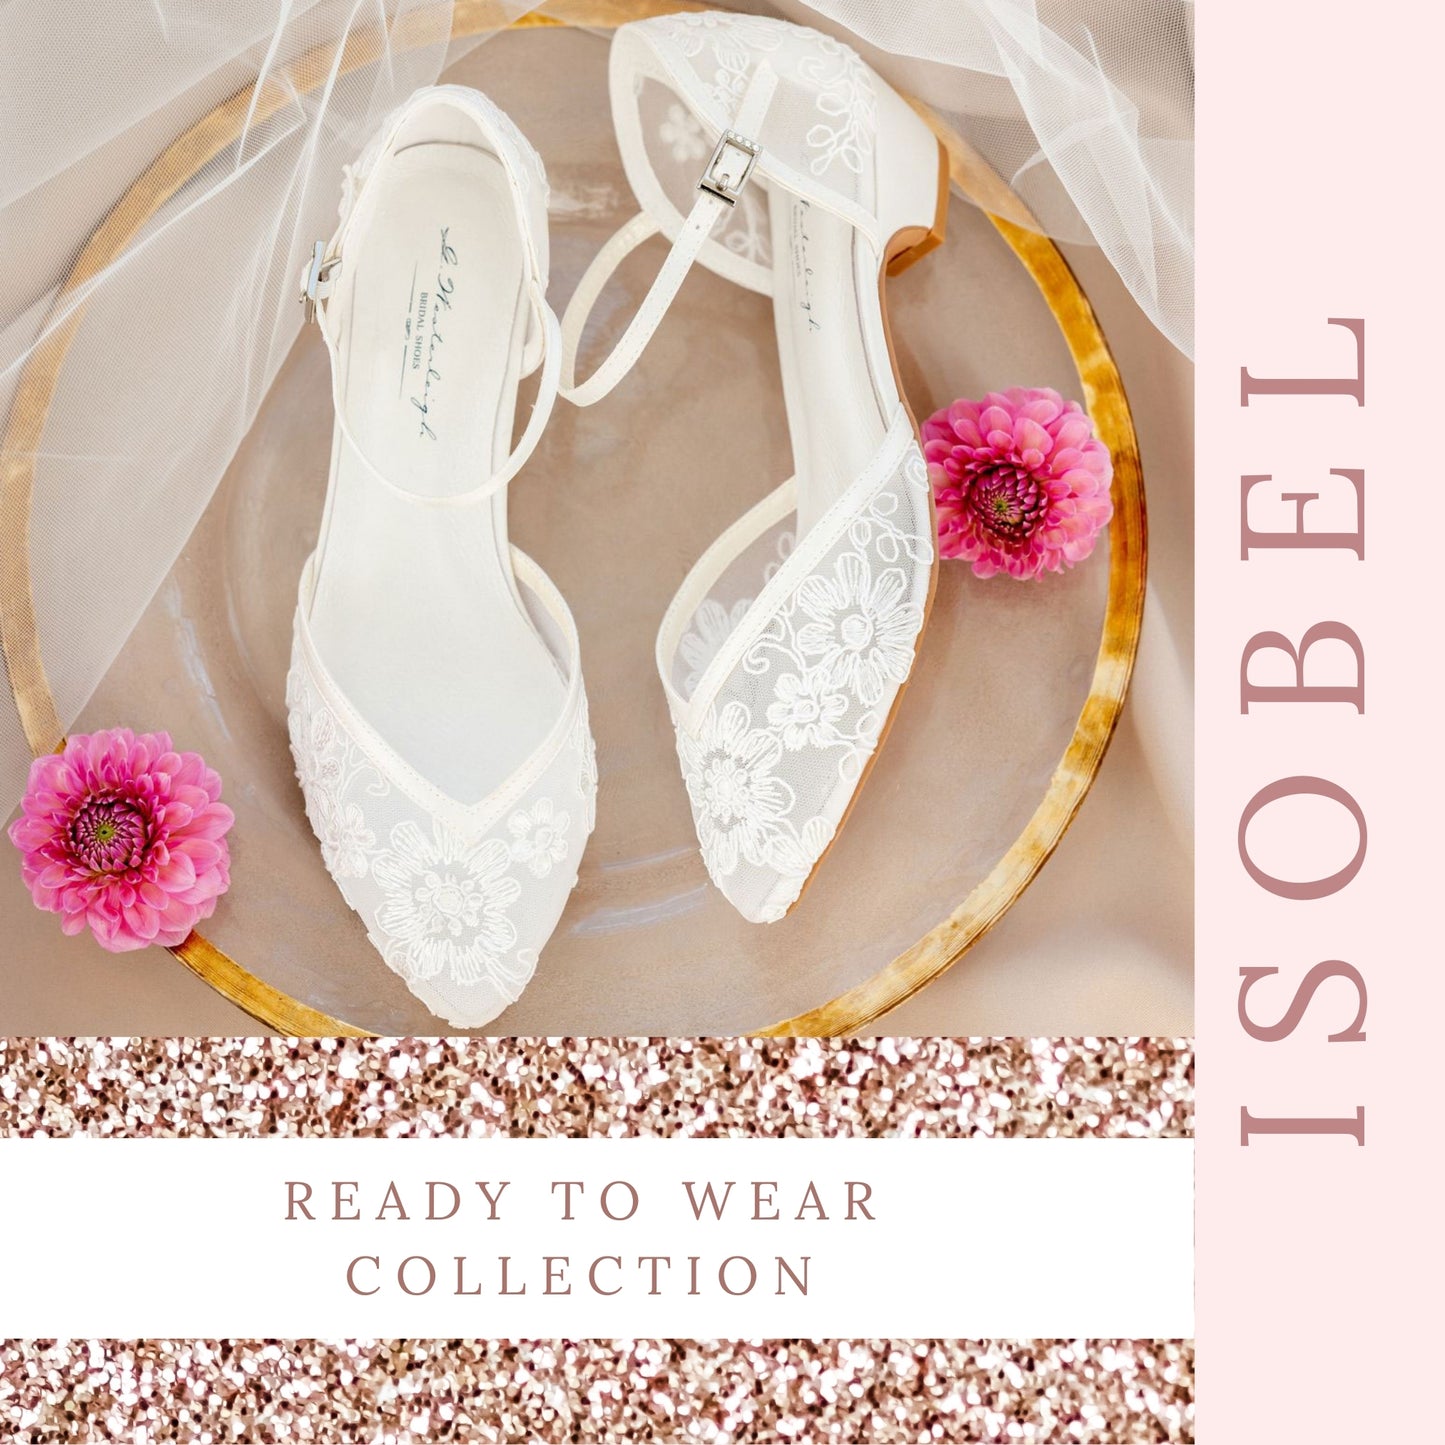 dressy-comfortable-sandals-for-wedding